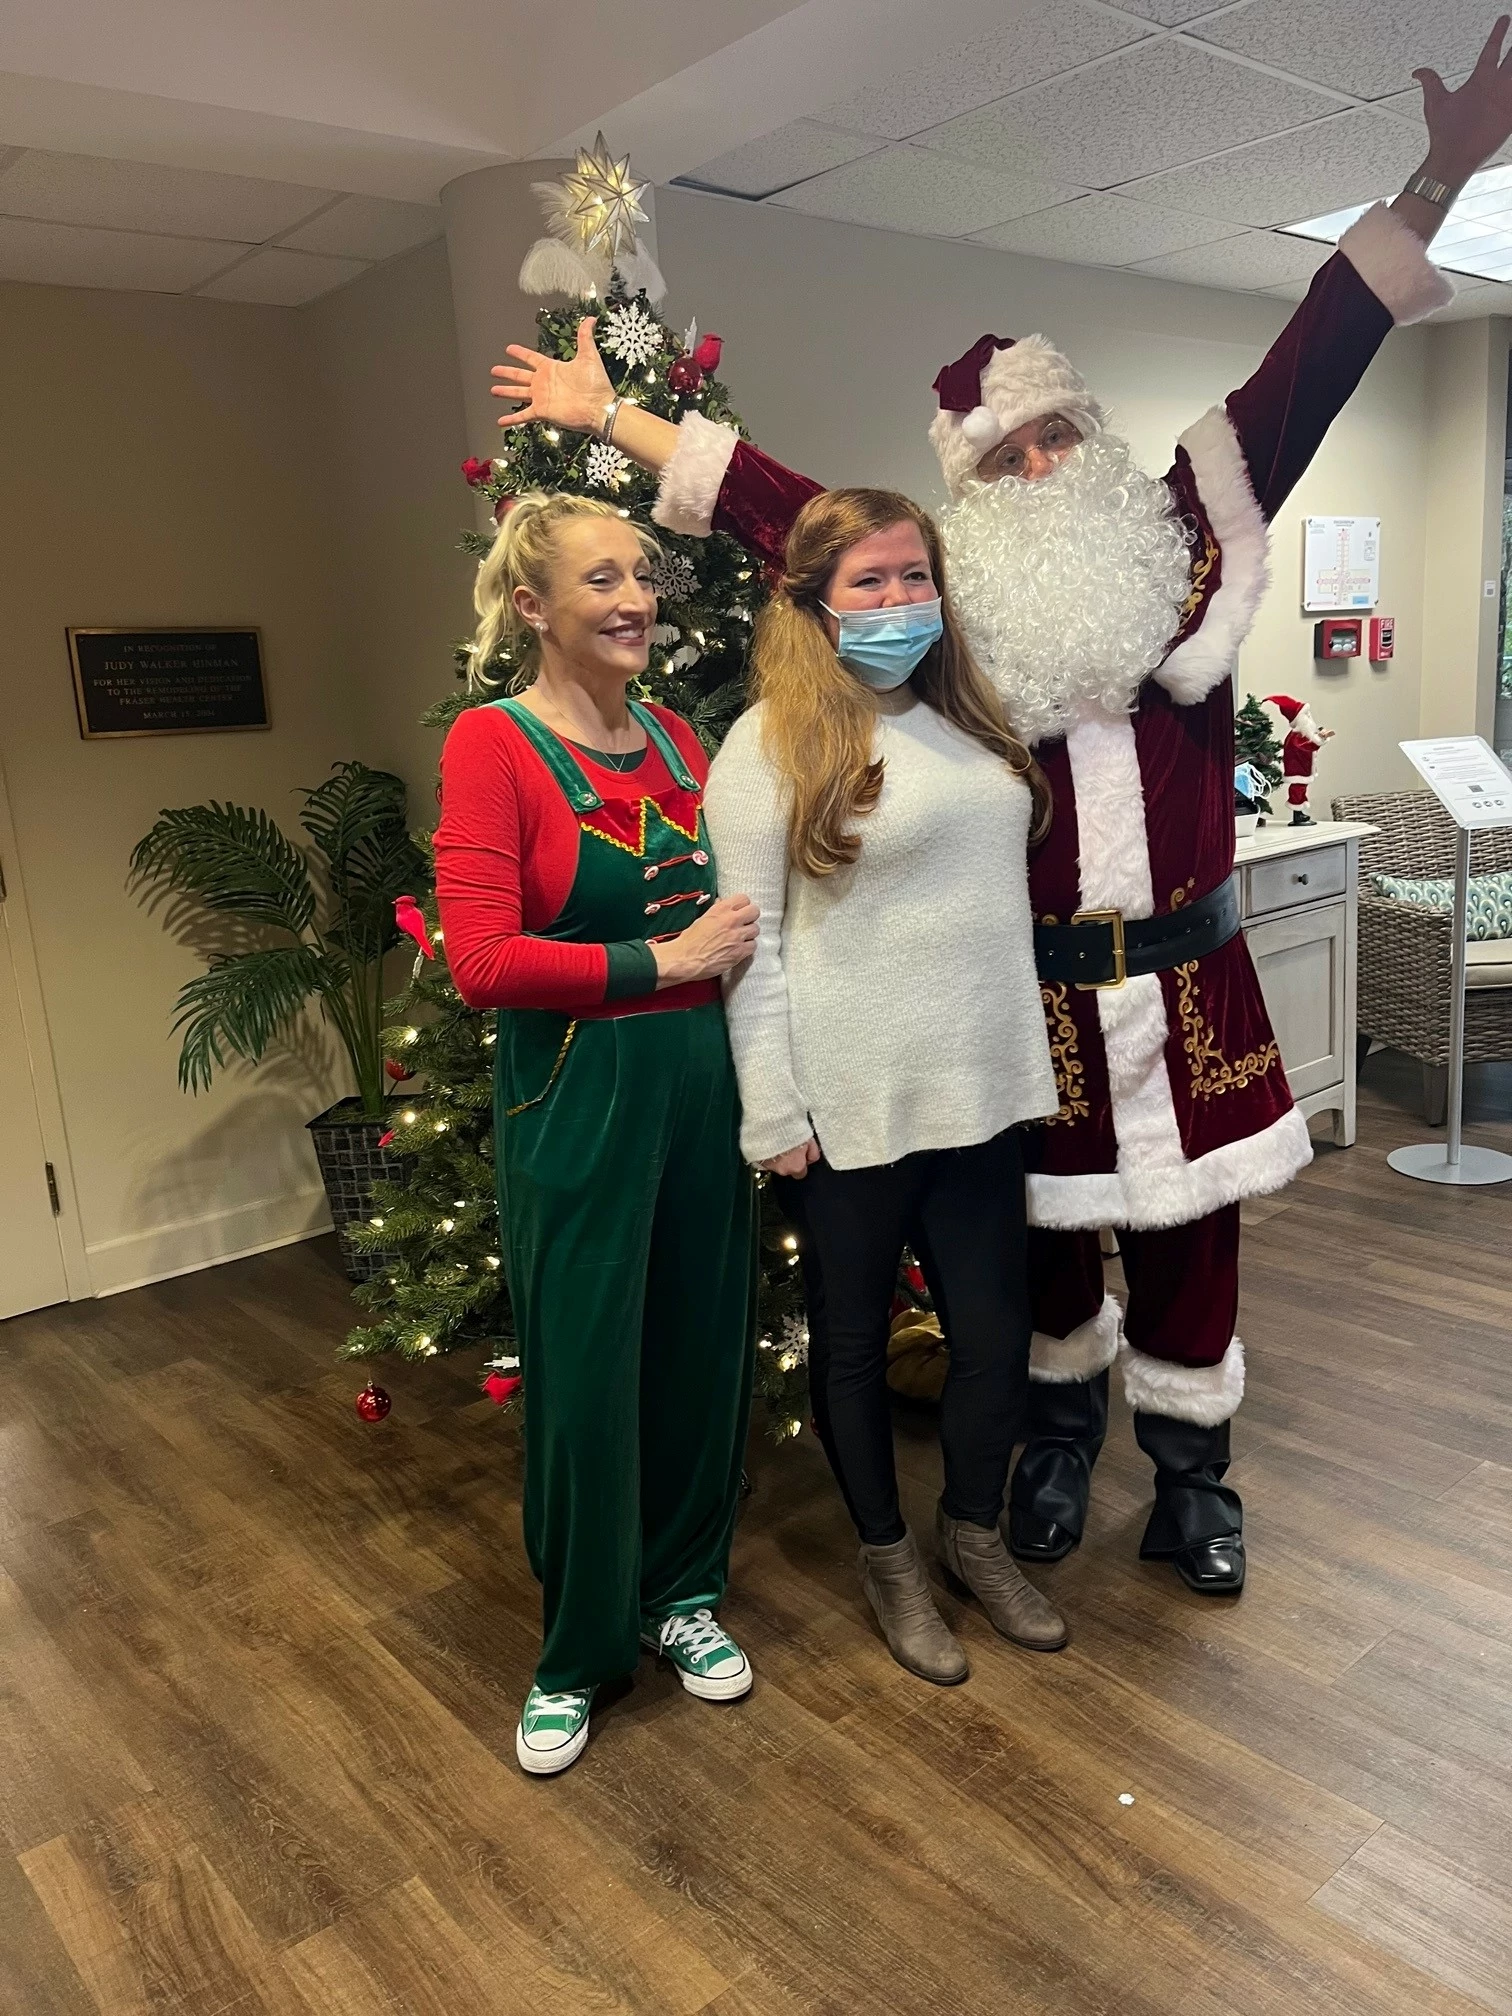 Senior Helpers, Life Care Hilton Head Island and Crescent Hospice collaborated to bring a Happy Christmas to residents.